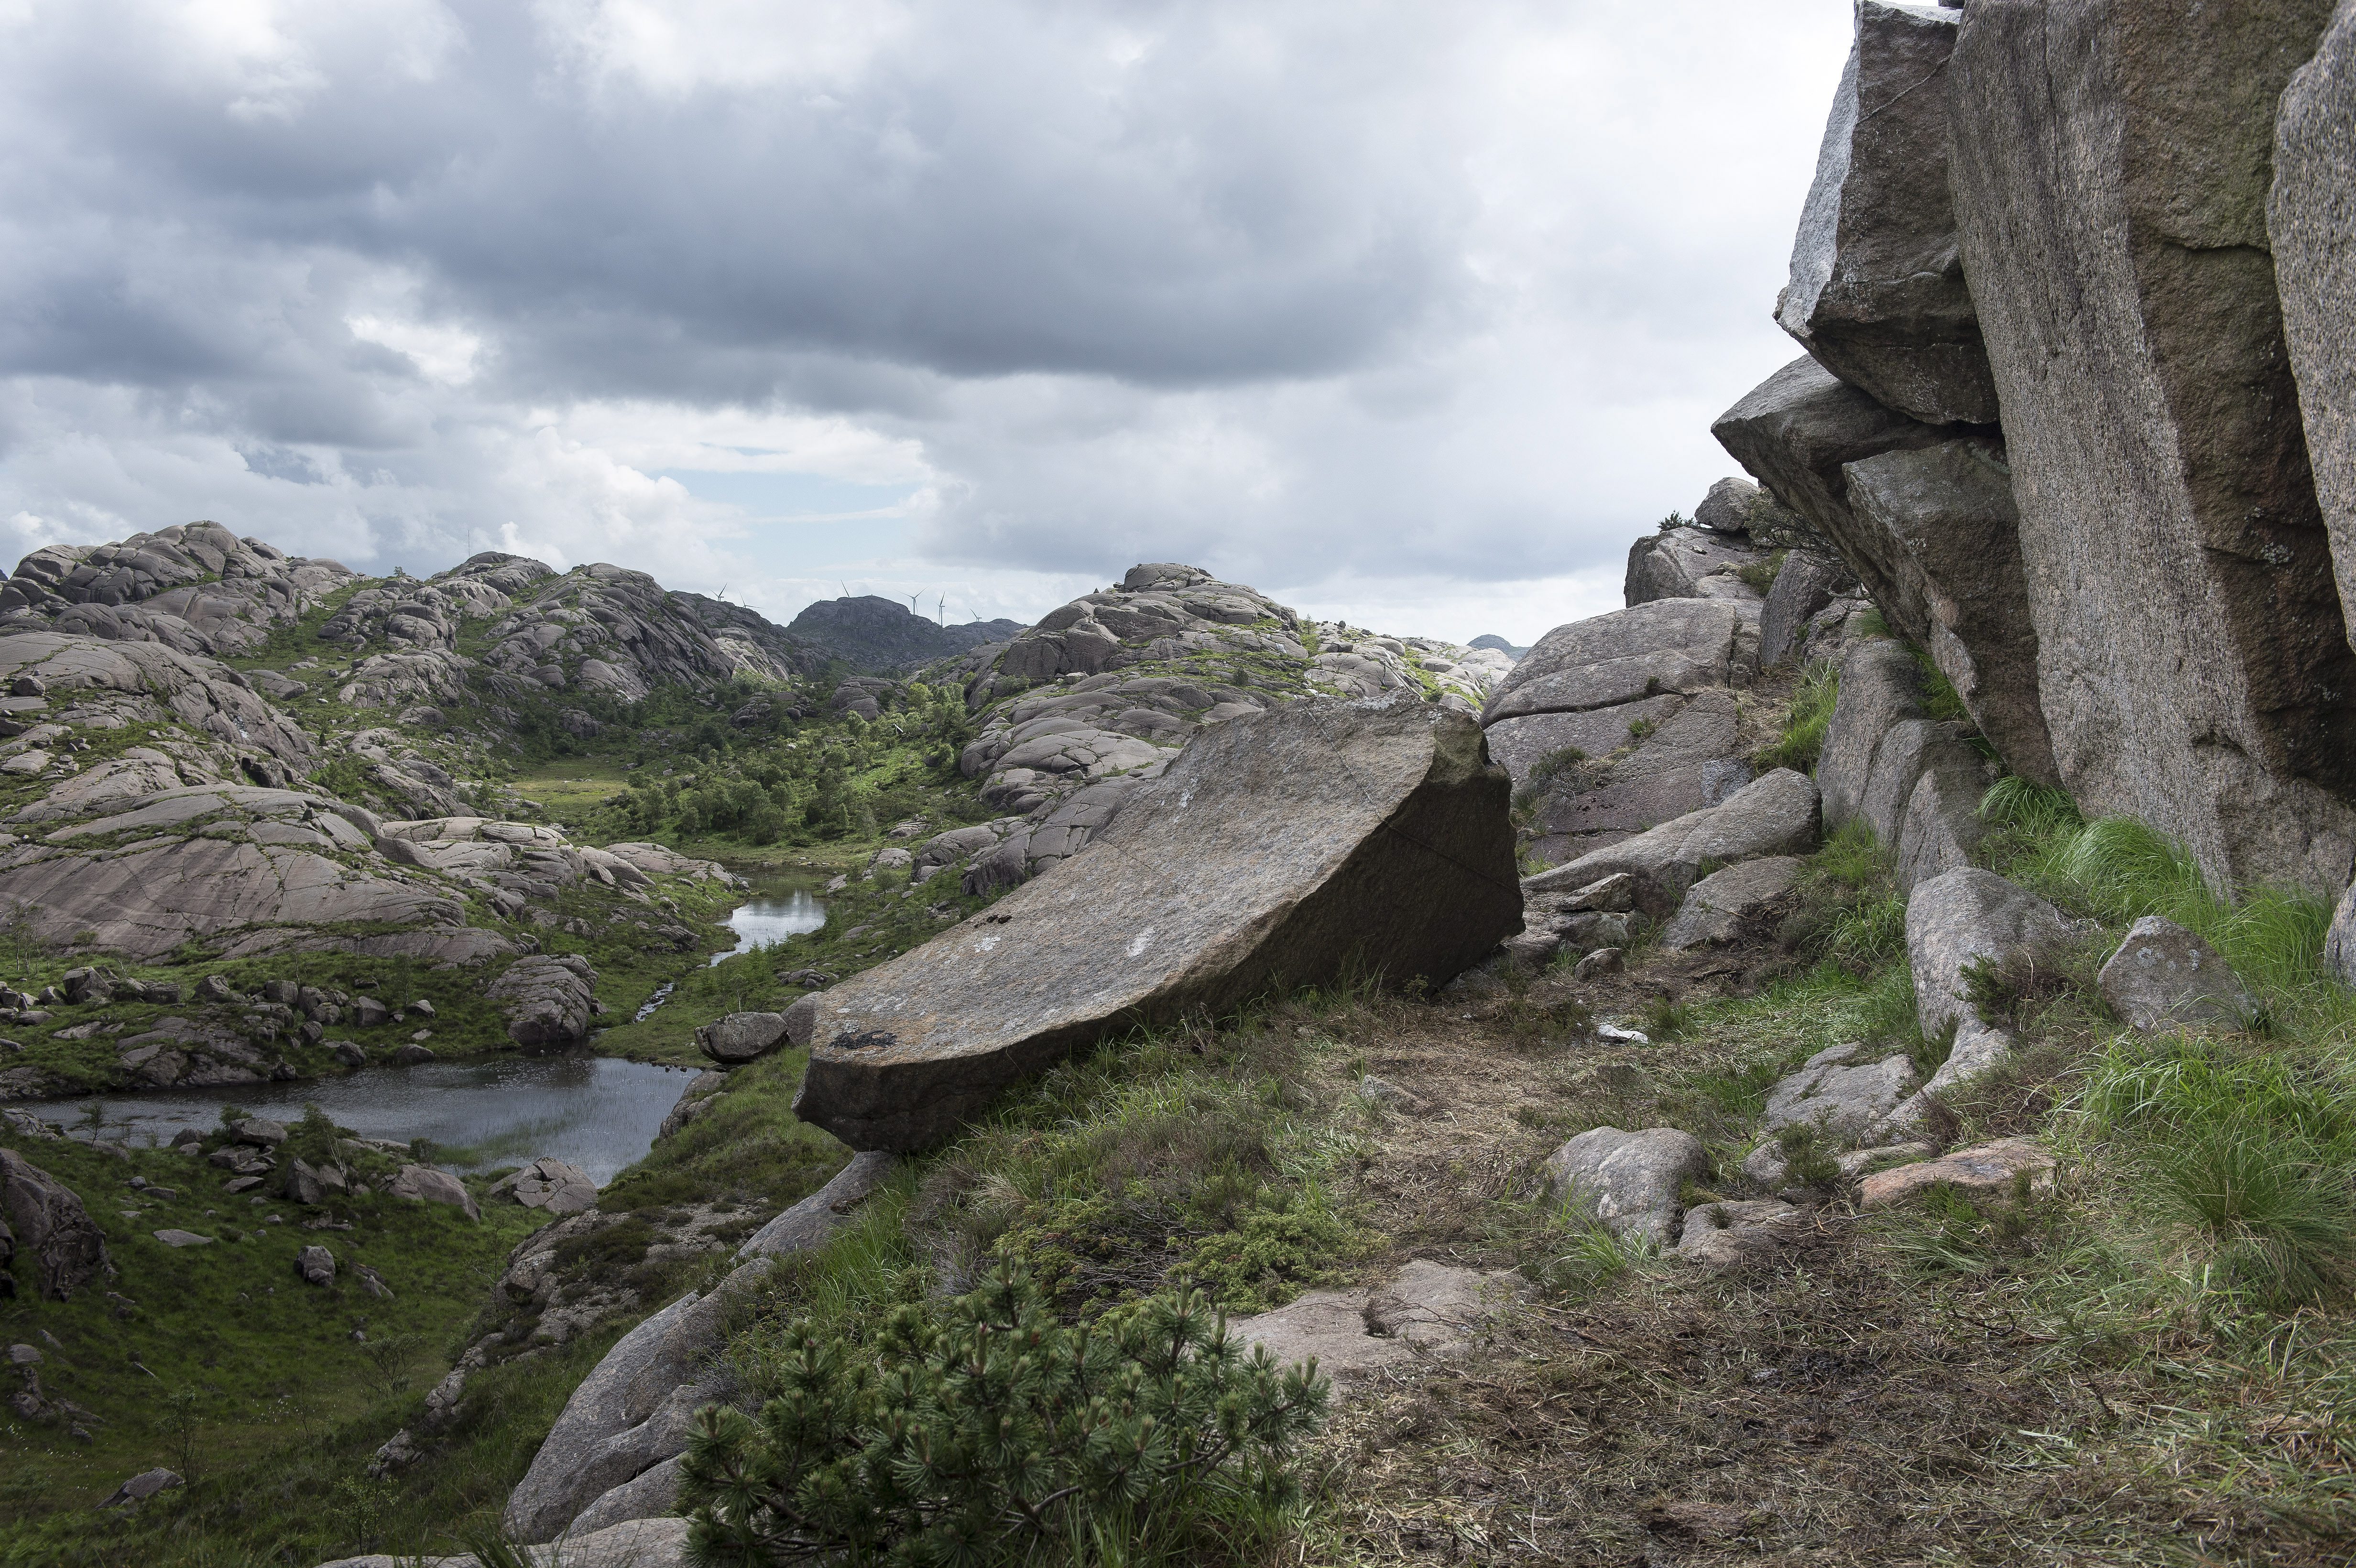 The damaged rock formation Trollpikken in Egersund, western Norway, Saturday June 24, 2017. A group of activists have started to collect money to repair the penis-shaped rock formation and a popular tourist attraction after it was found badly damaged Saturday June 24, 2017. It was discovered cracked complete with drilling holes in the rock - something that experts say suggests strongly that it was cut off on purpose. (Carina Johansen/NTB Scanpix via AP)